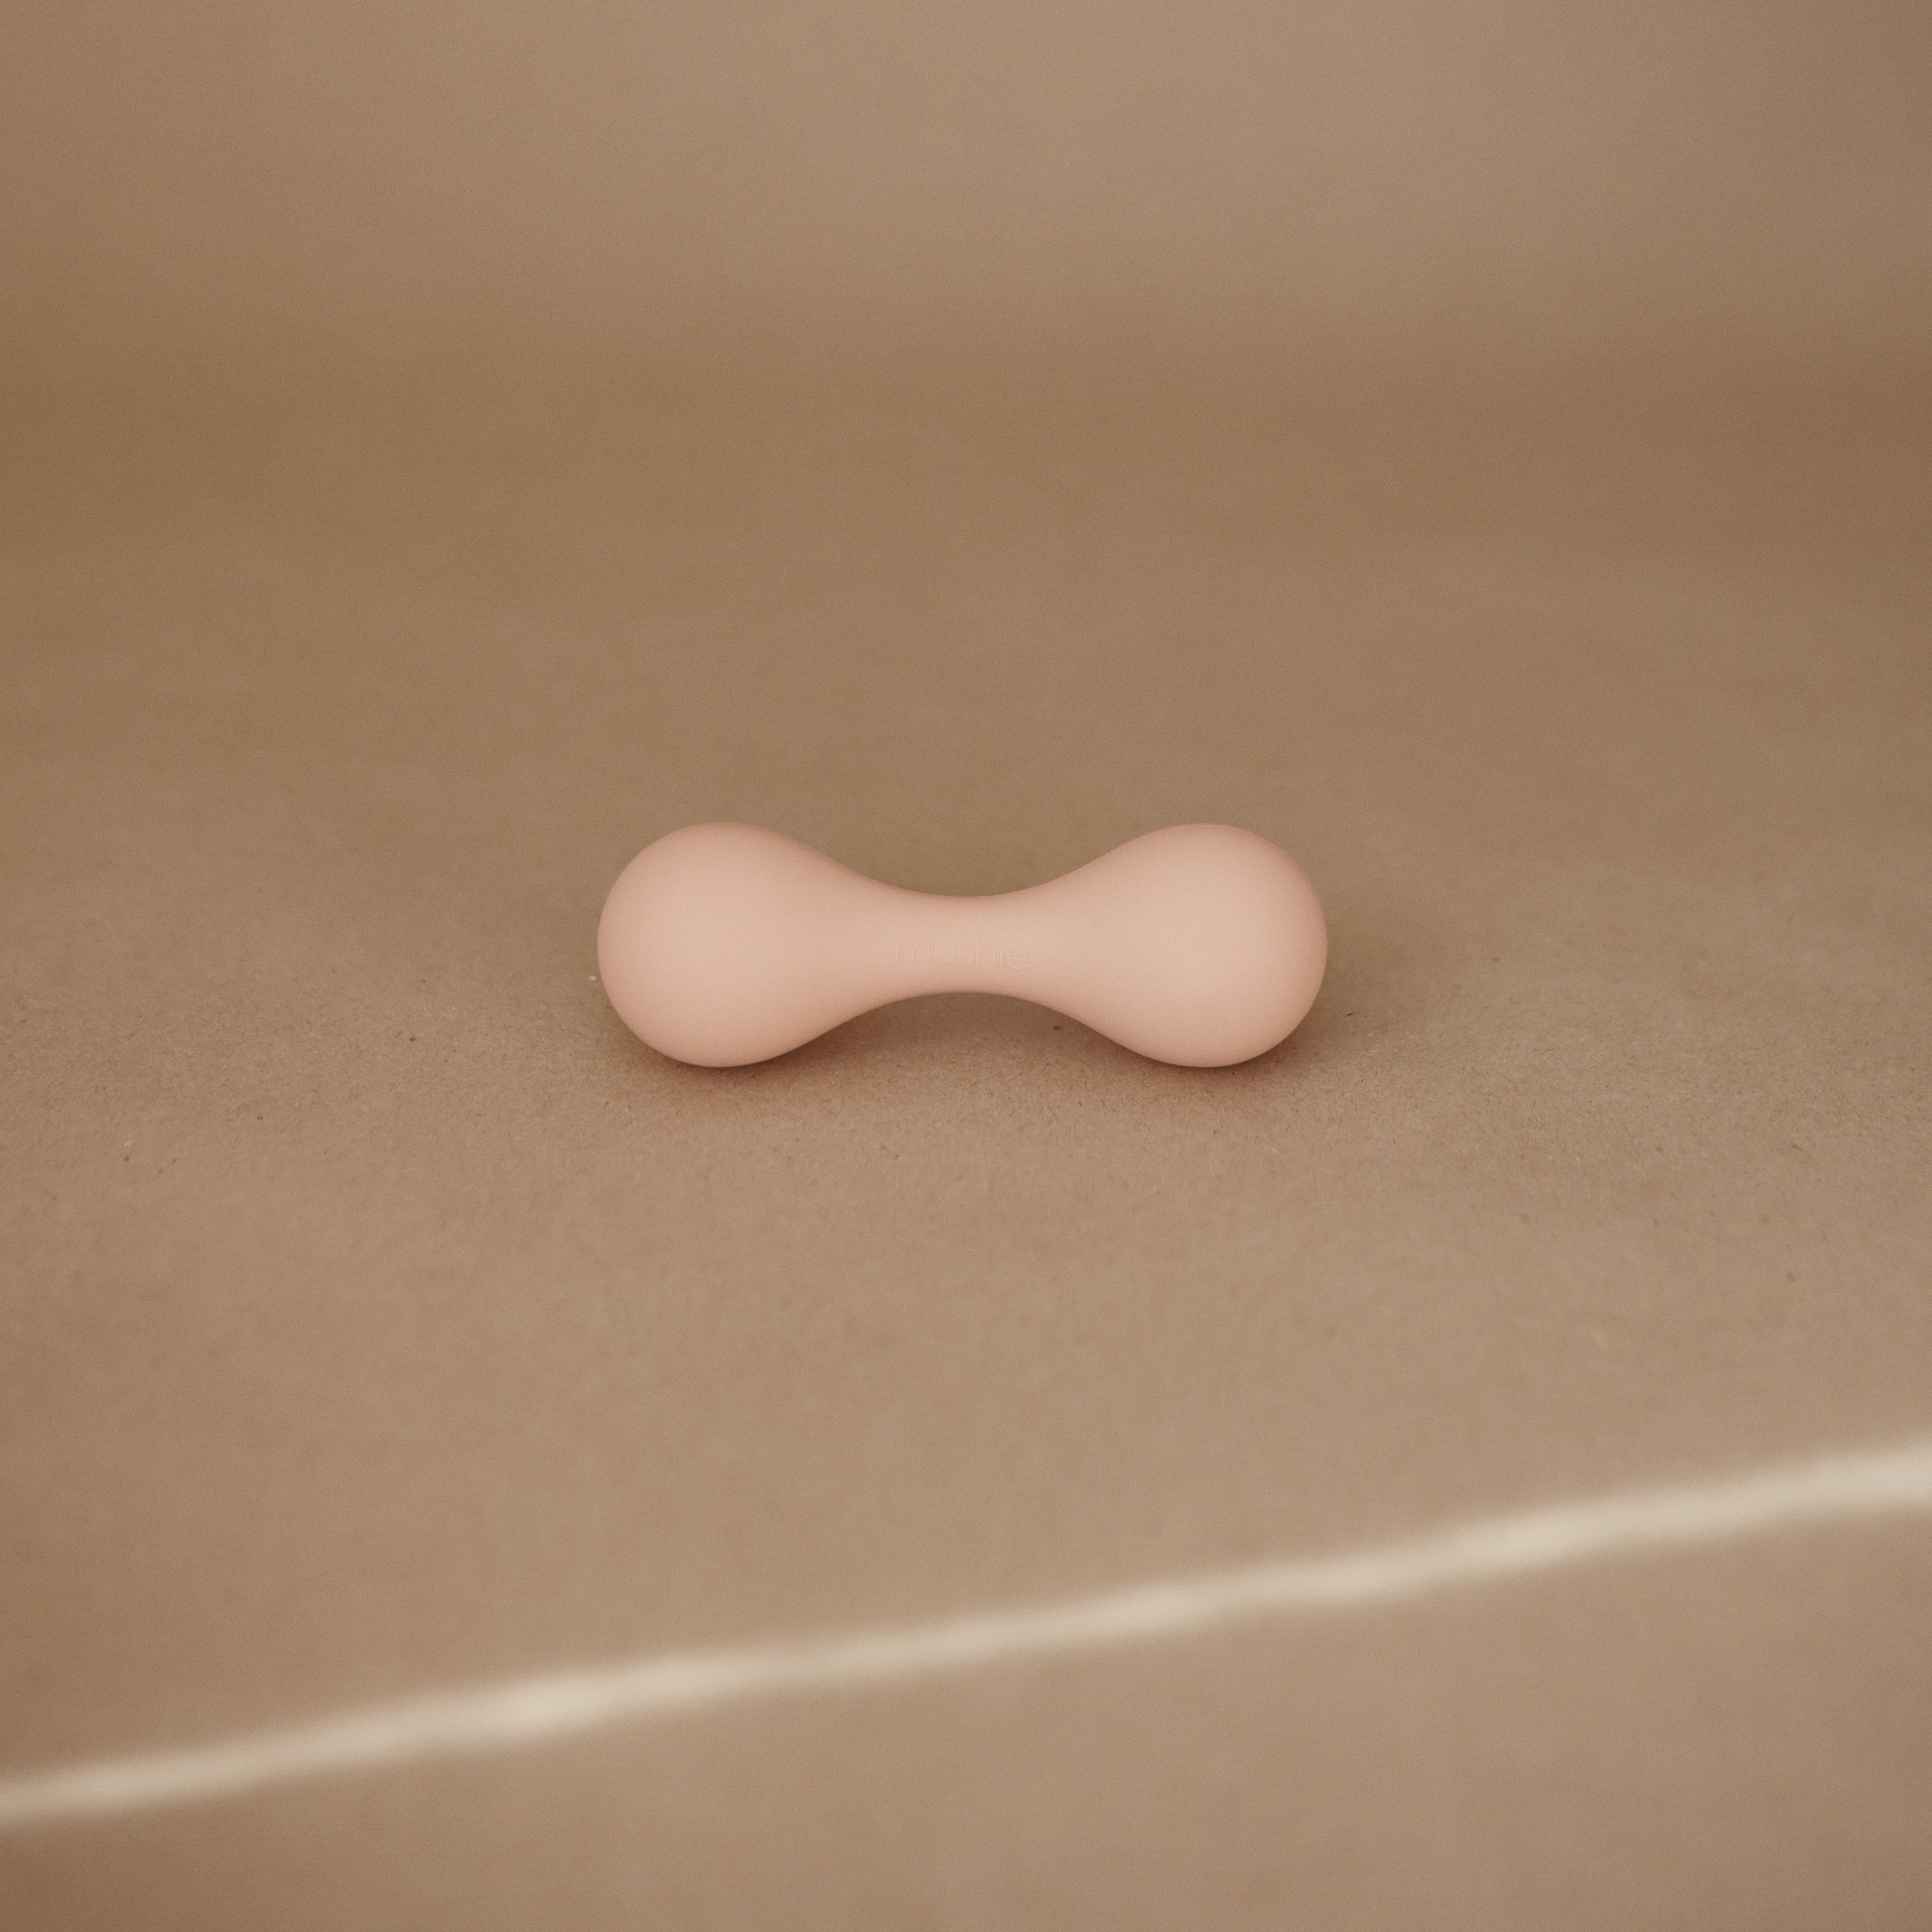 Silicone Baby Rattle Toy